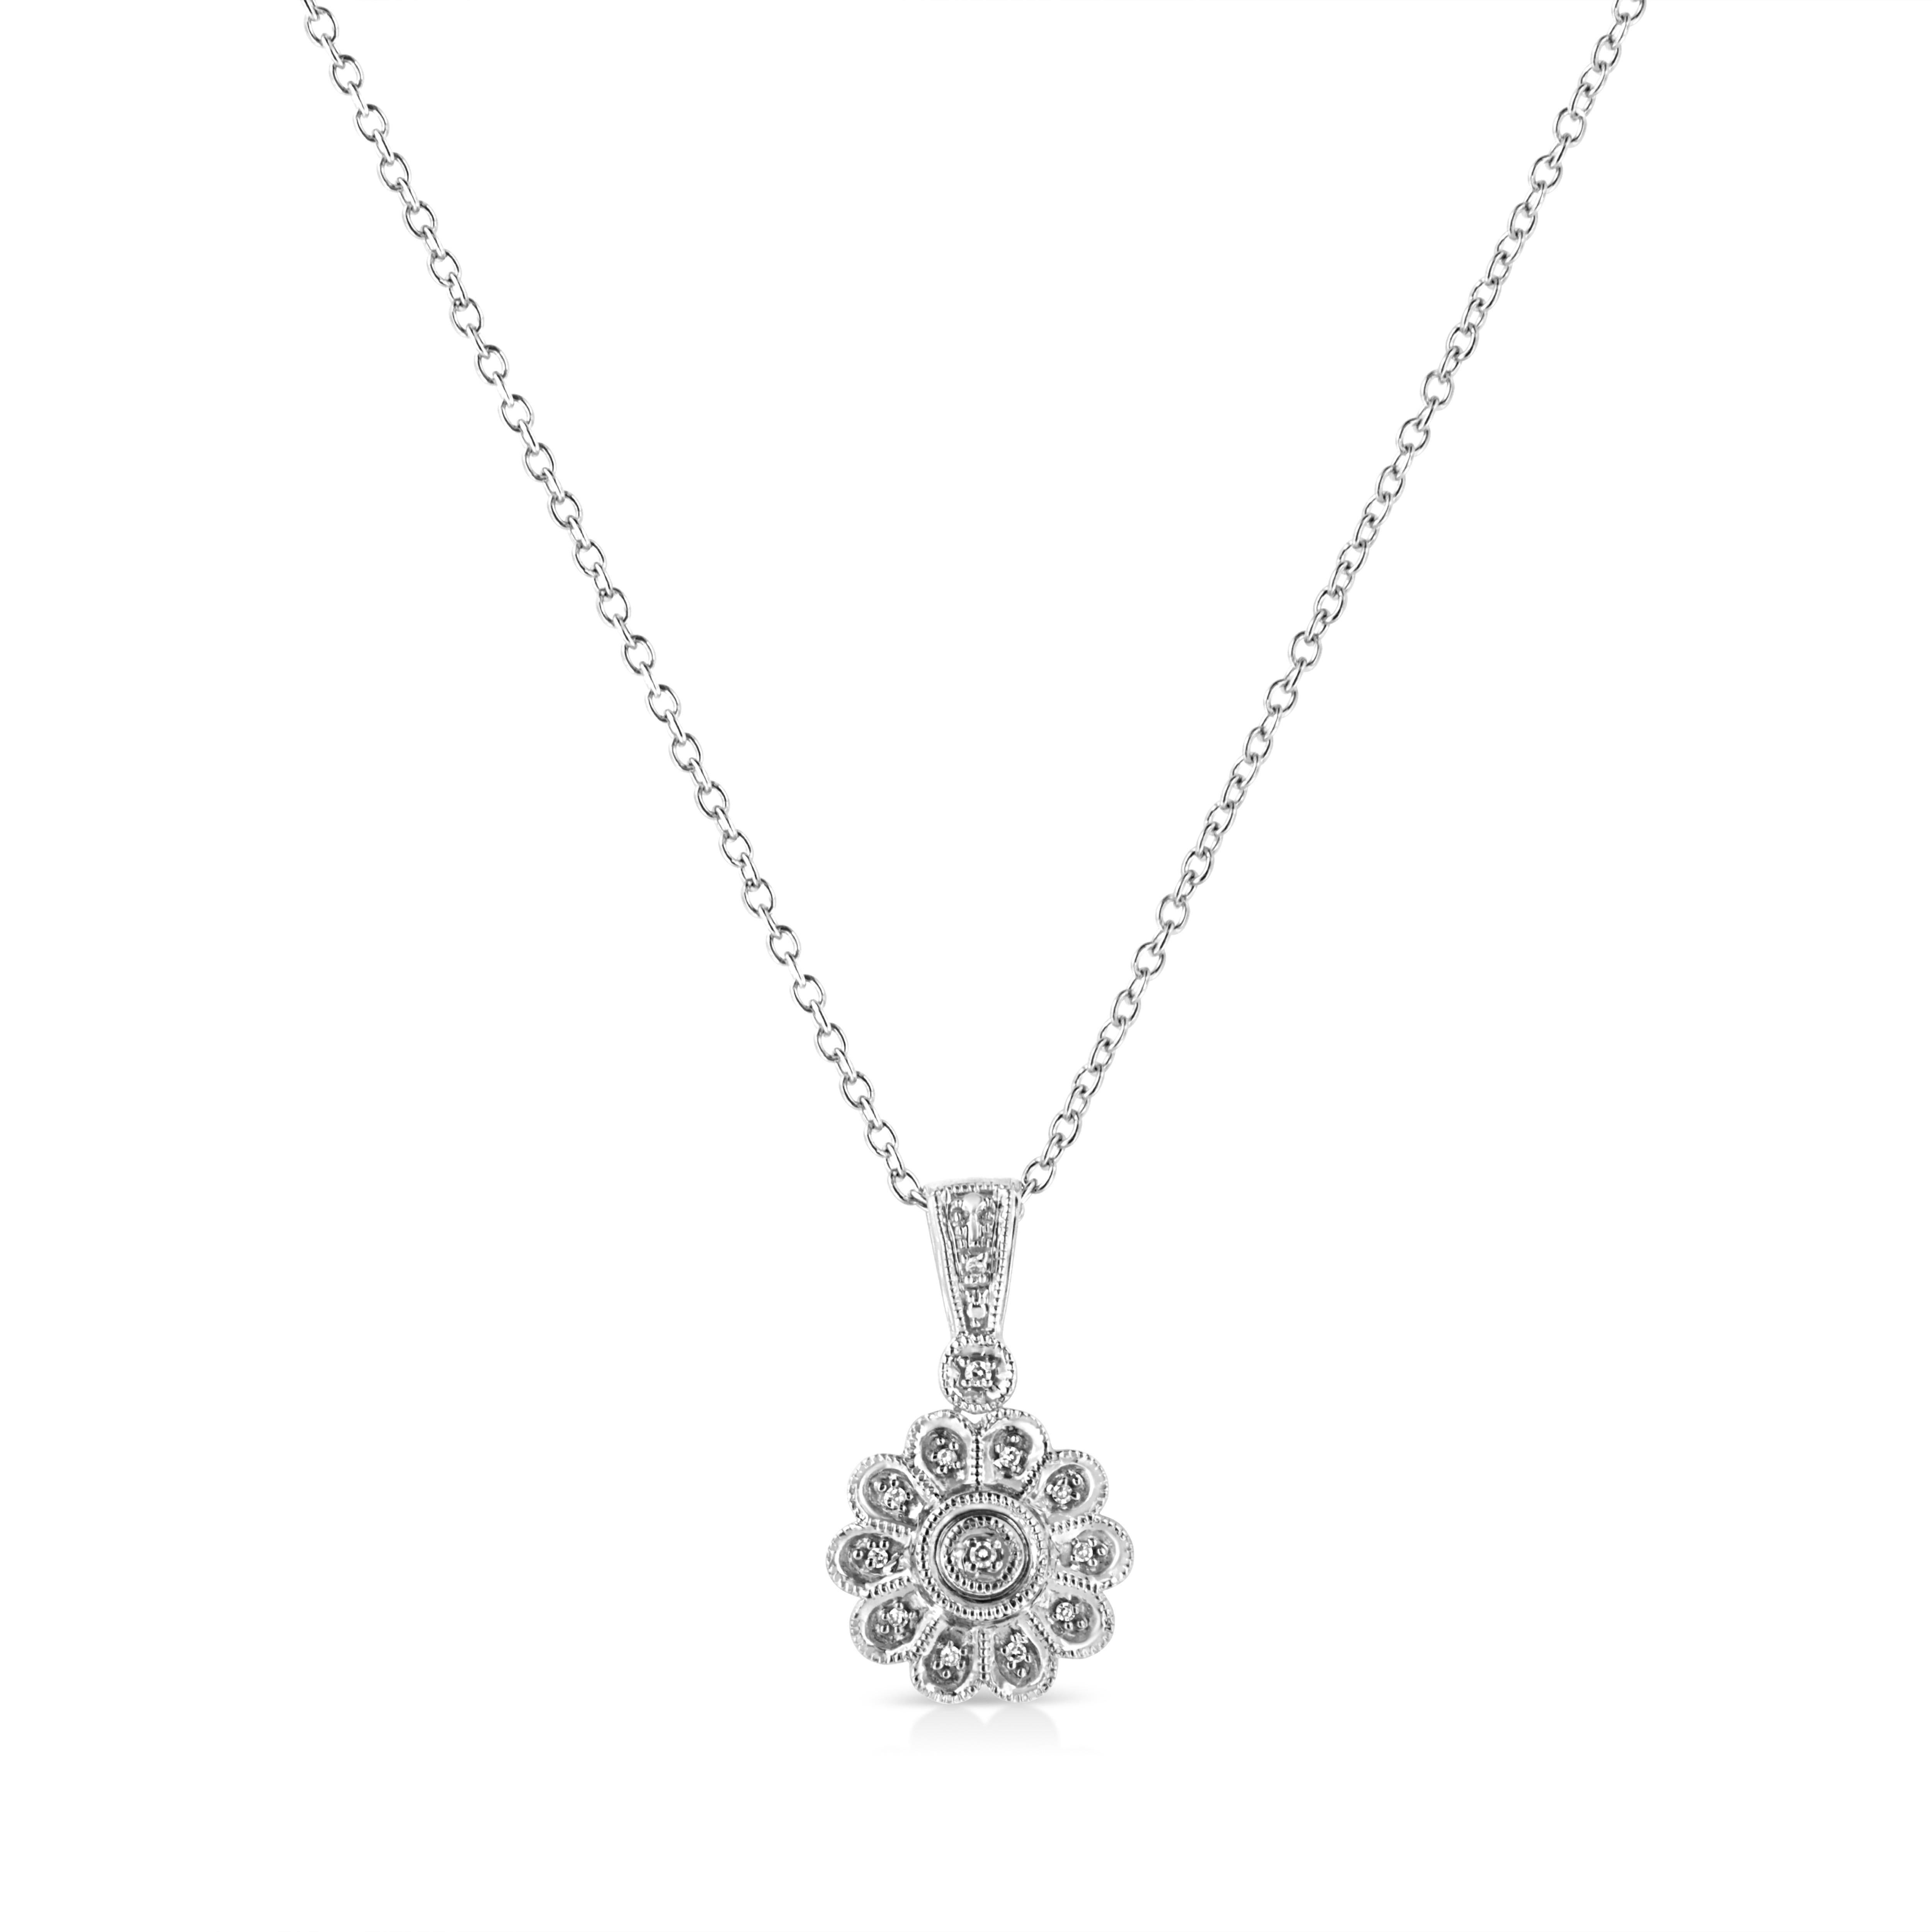 A fabulously stylish and simple milgrain finished Diamond Cluster Pendant showcases 13 single cut pave set diamonds, beautifully set to glowing perfection in floral motif. The pendant is crafted in sterling silver and suspends gracefully from a